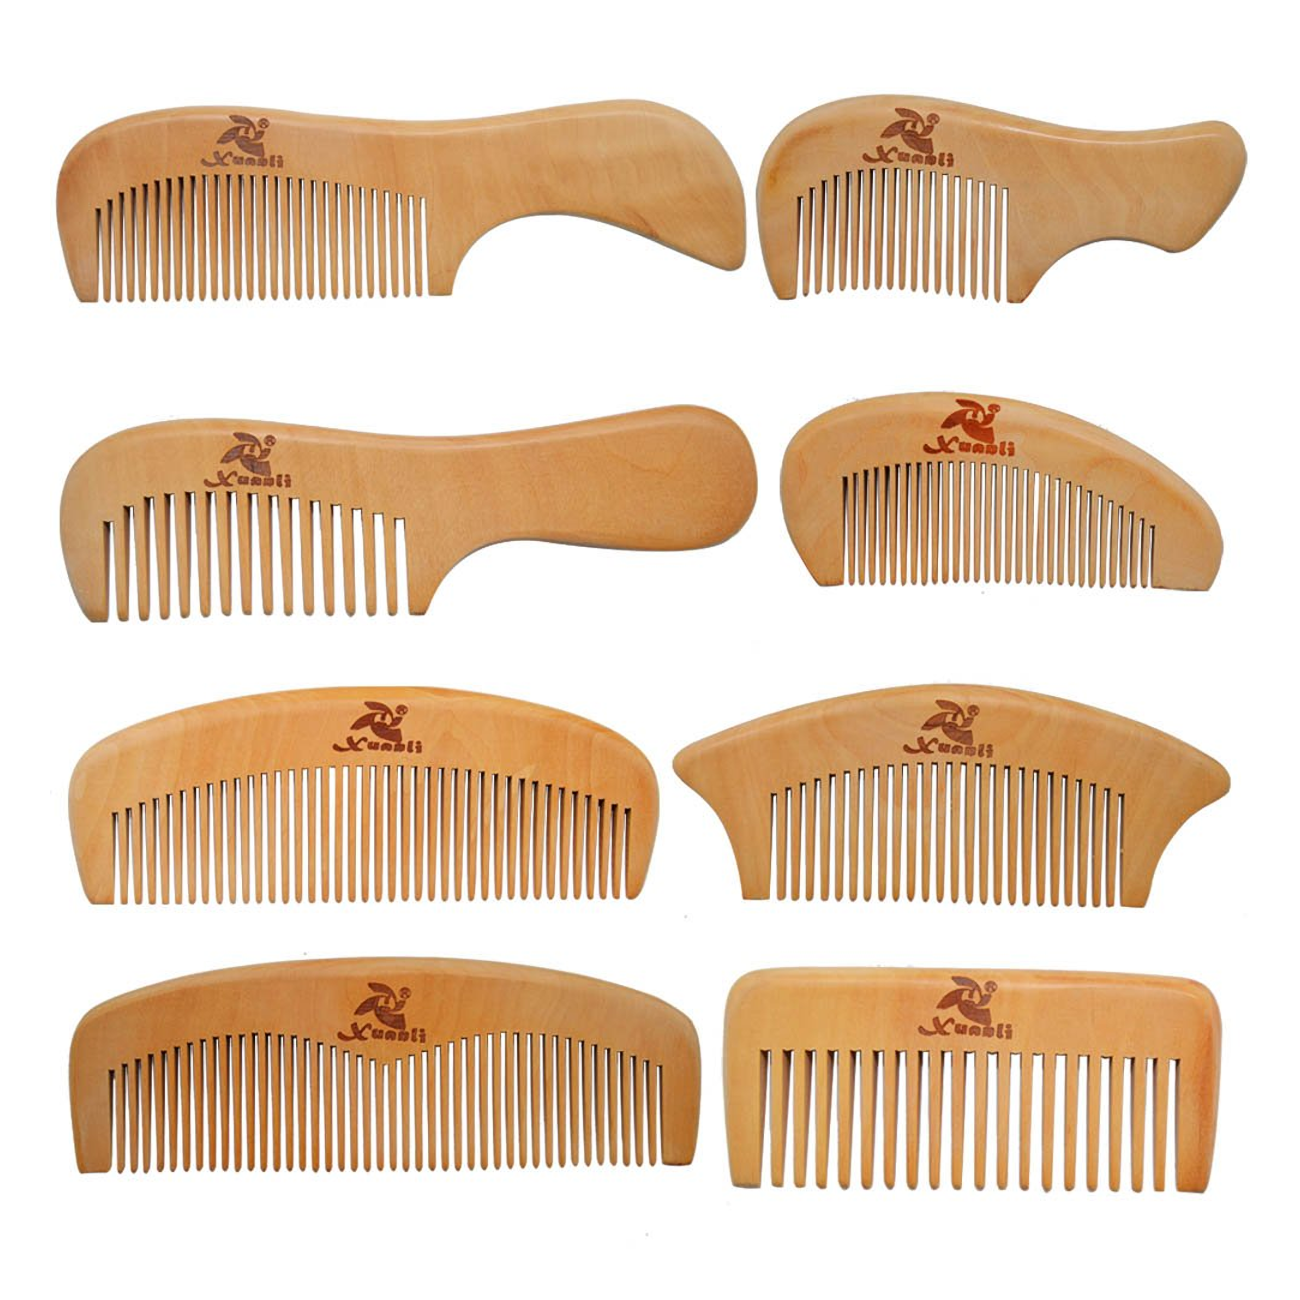 Xuanli® 8 Pcs The Family Of Hair Comb set, Wooden